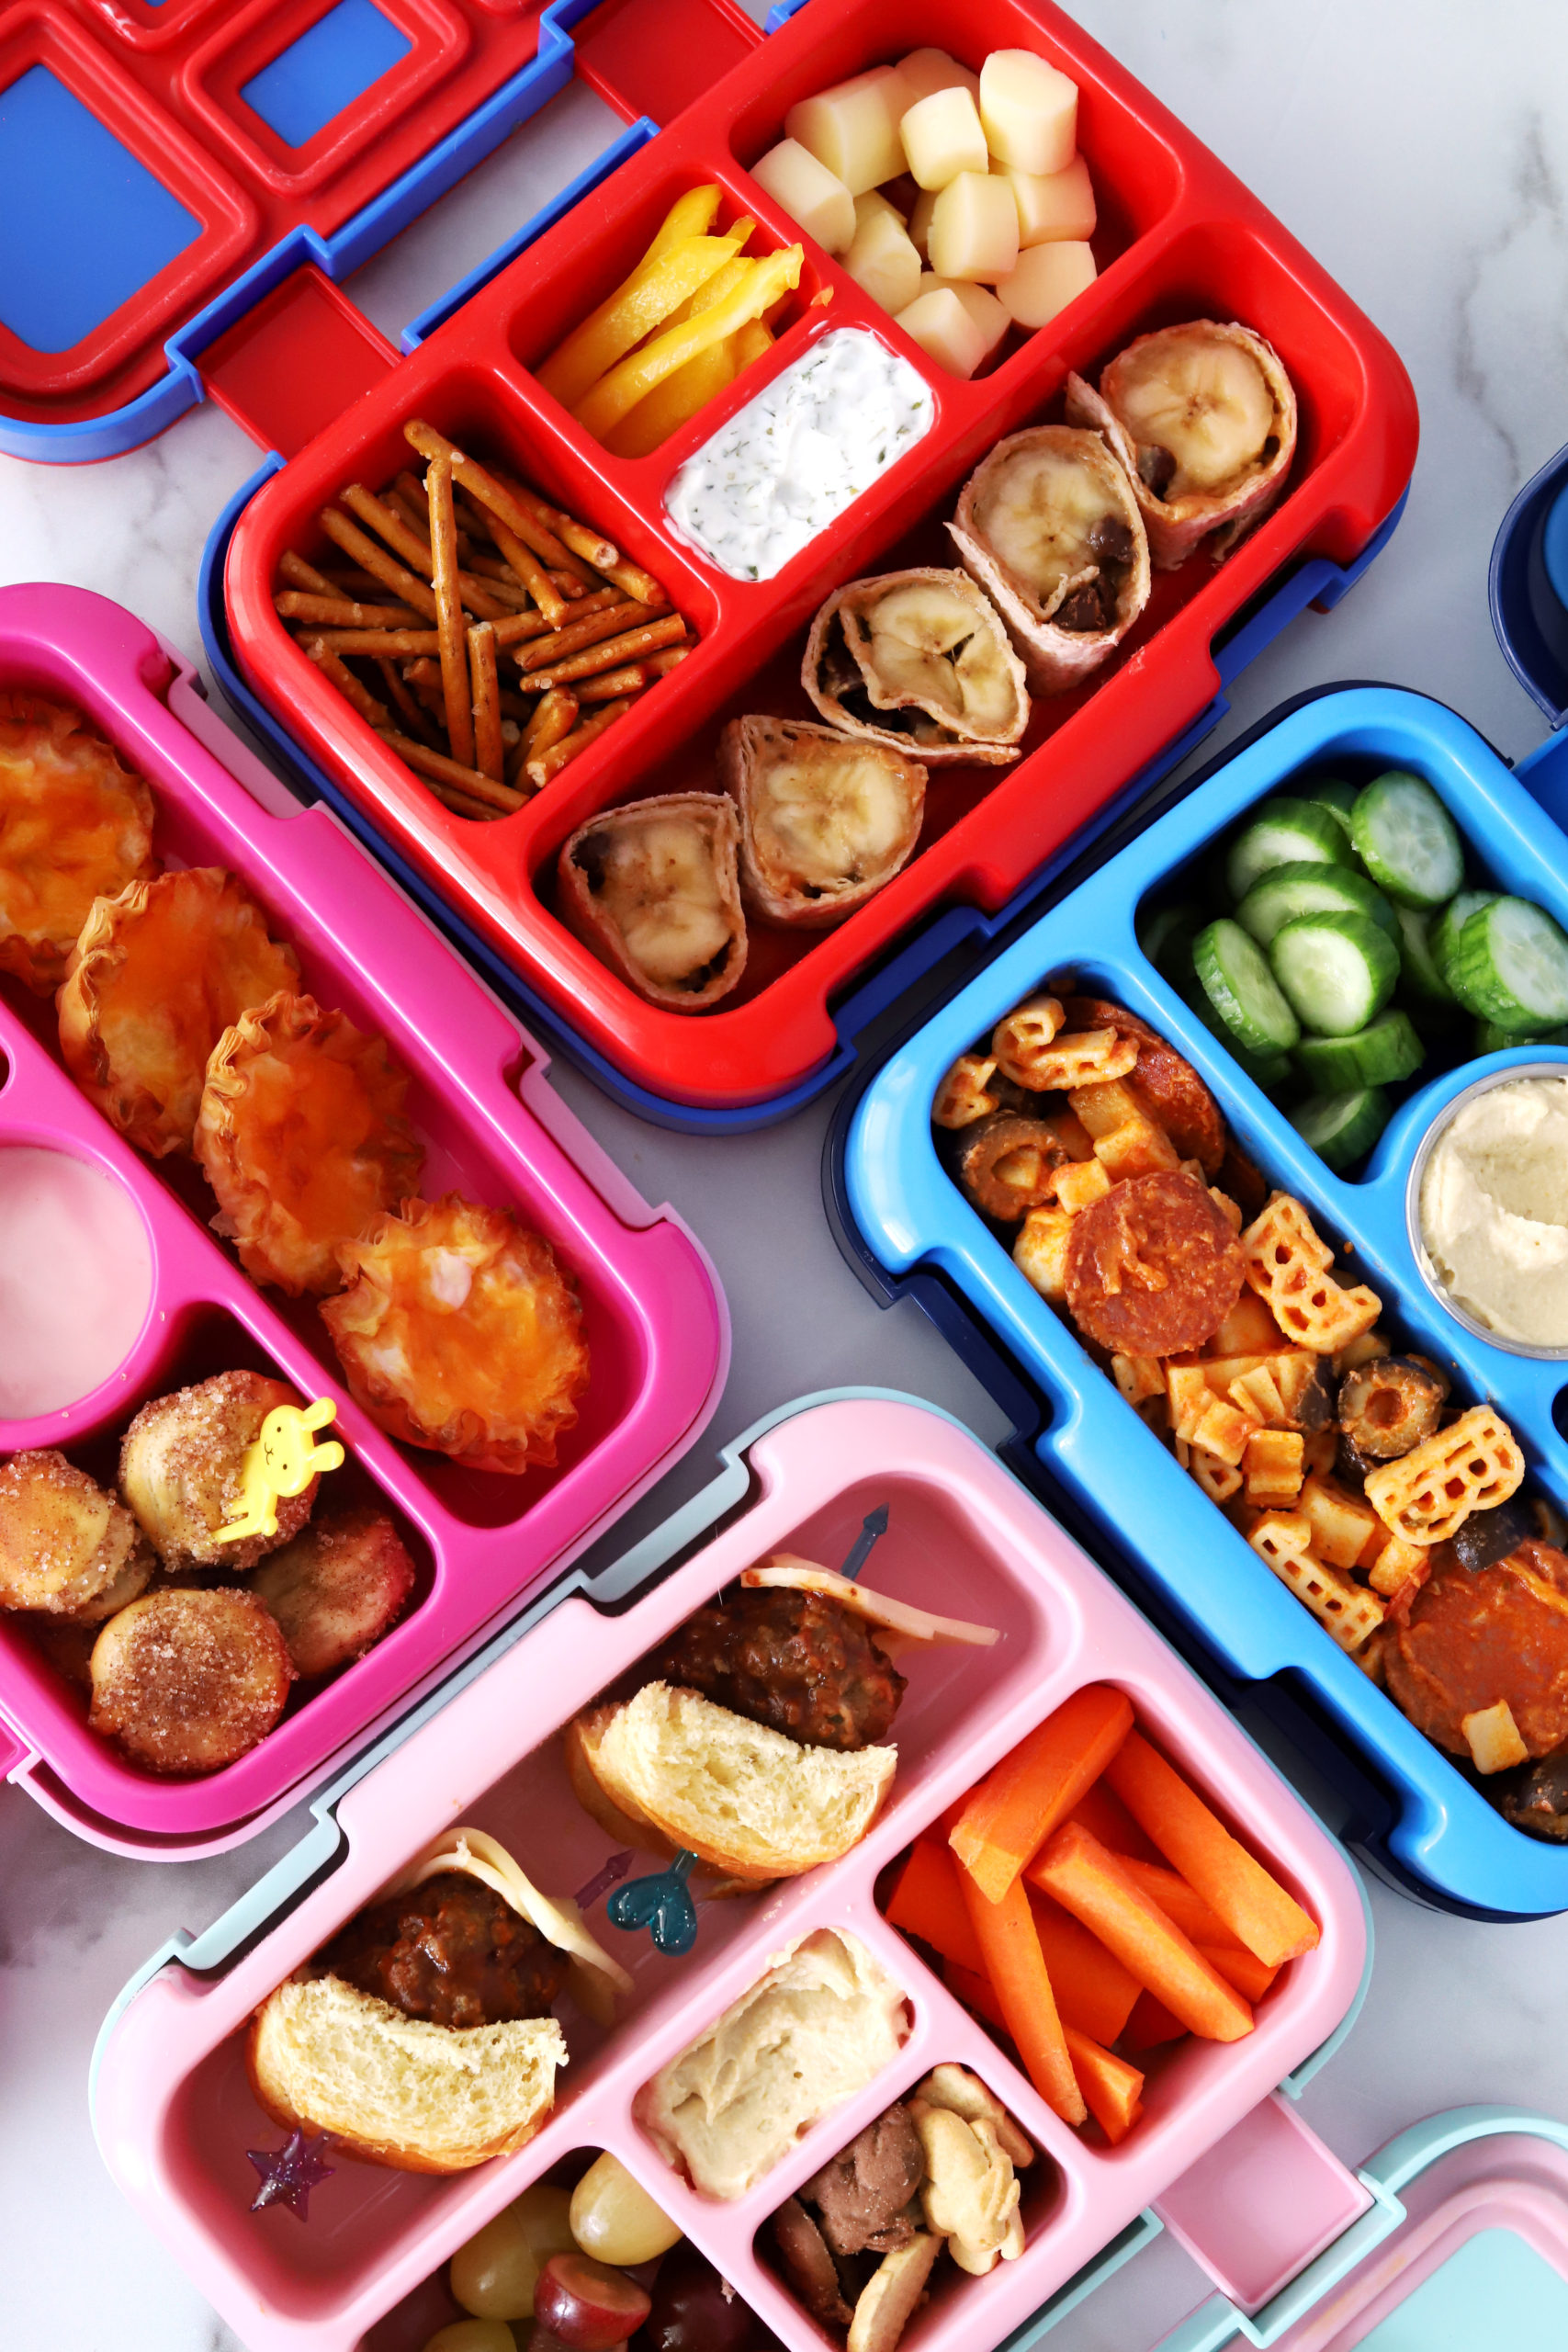 20 of the BEST Bento Lunch Ideas for Toddlers Story - 3 Boys and a Dog